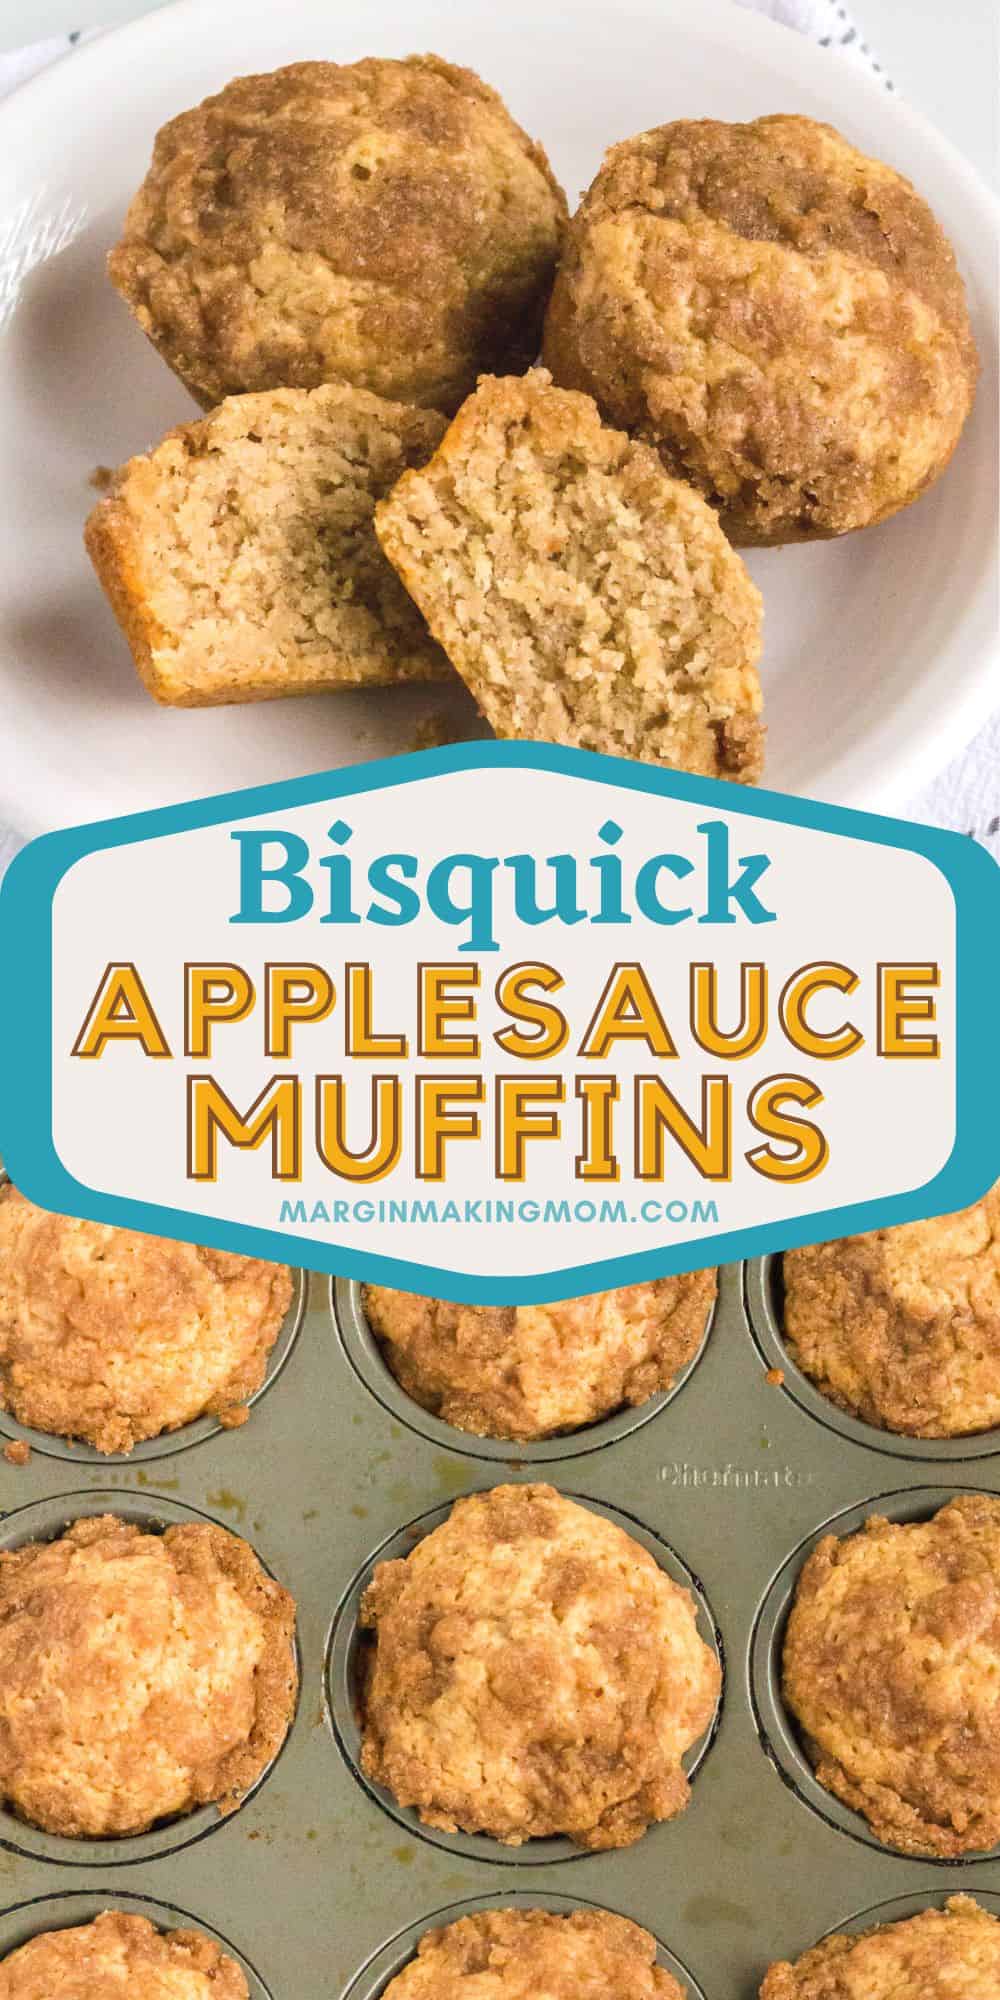 two photos; one shows three applesauce Bisquick muffins on a plate, the other shows multiple muffins in the pan after baking